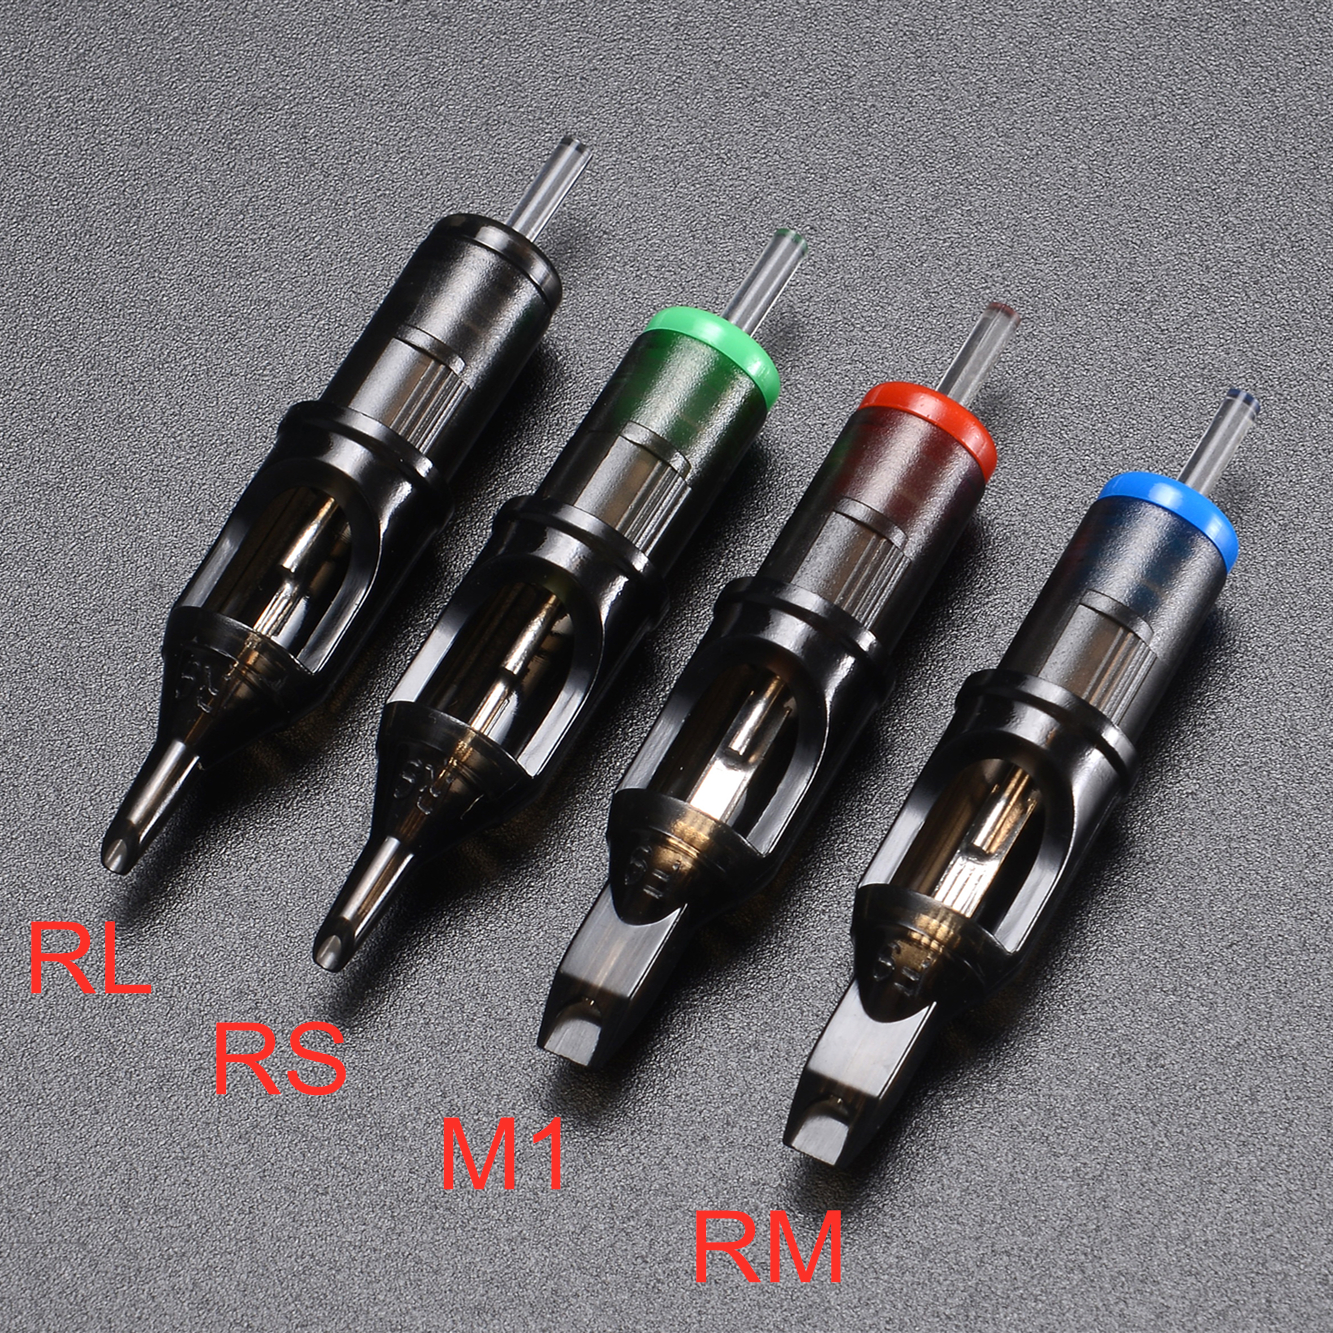 Round Shader Sterilized Disposable Medical Grade Tattoo Cartridge Needle with Membrane System